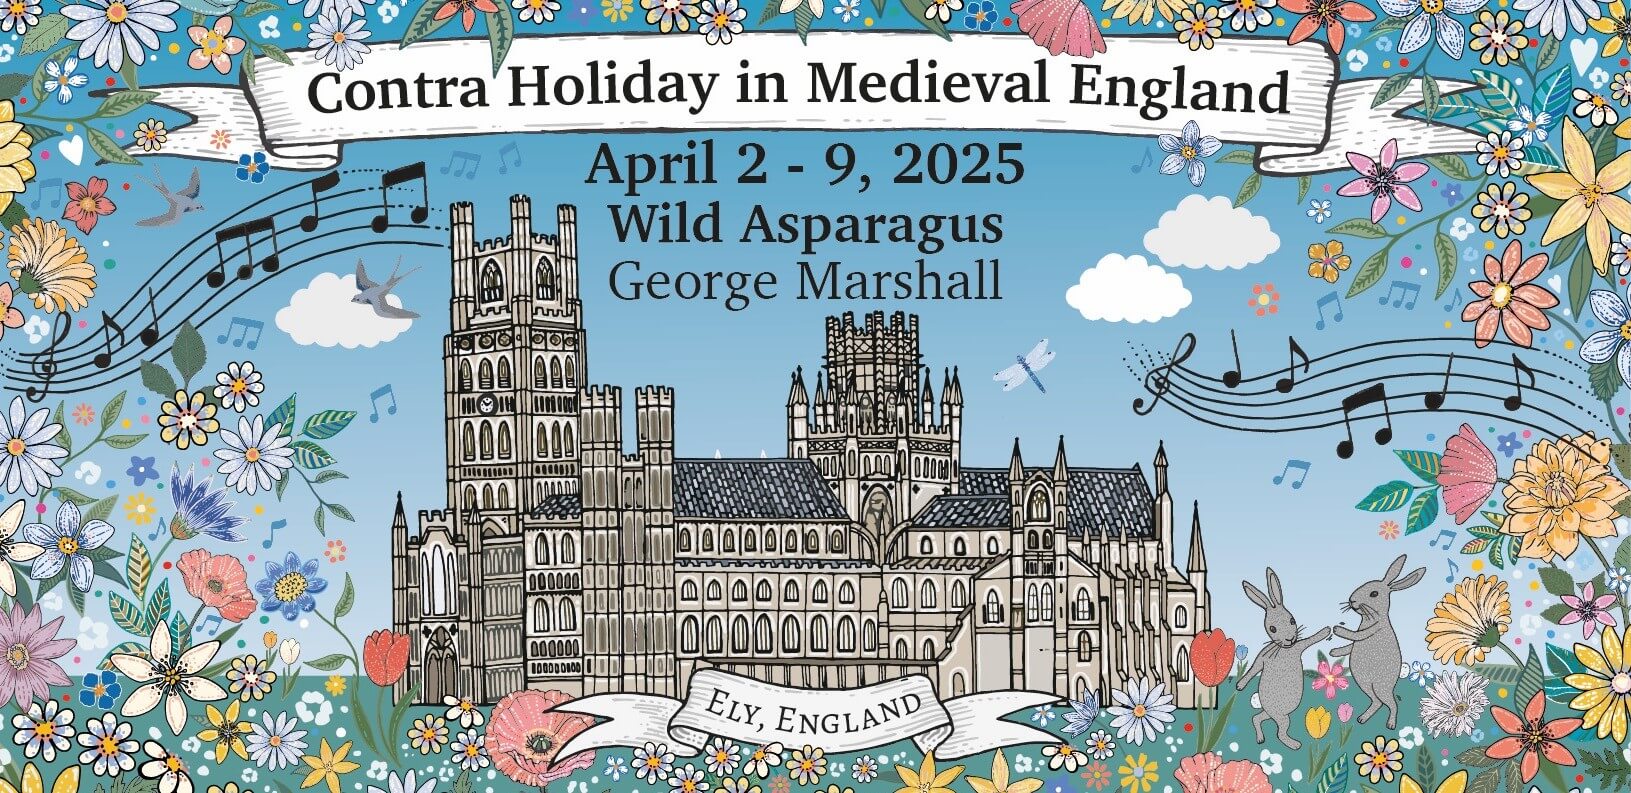 Contra Holiday in Medieval England 2025